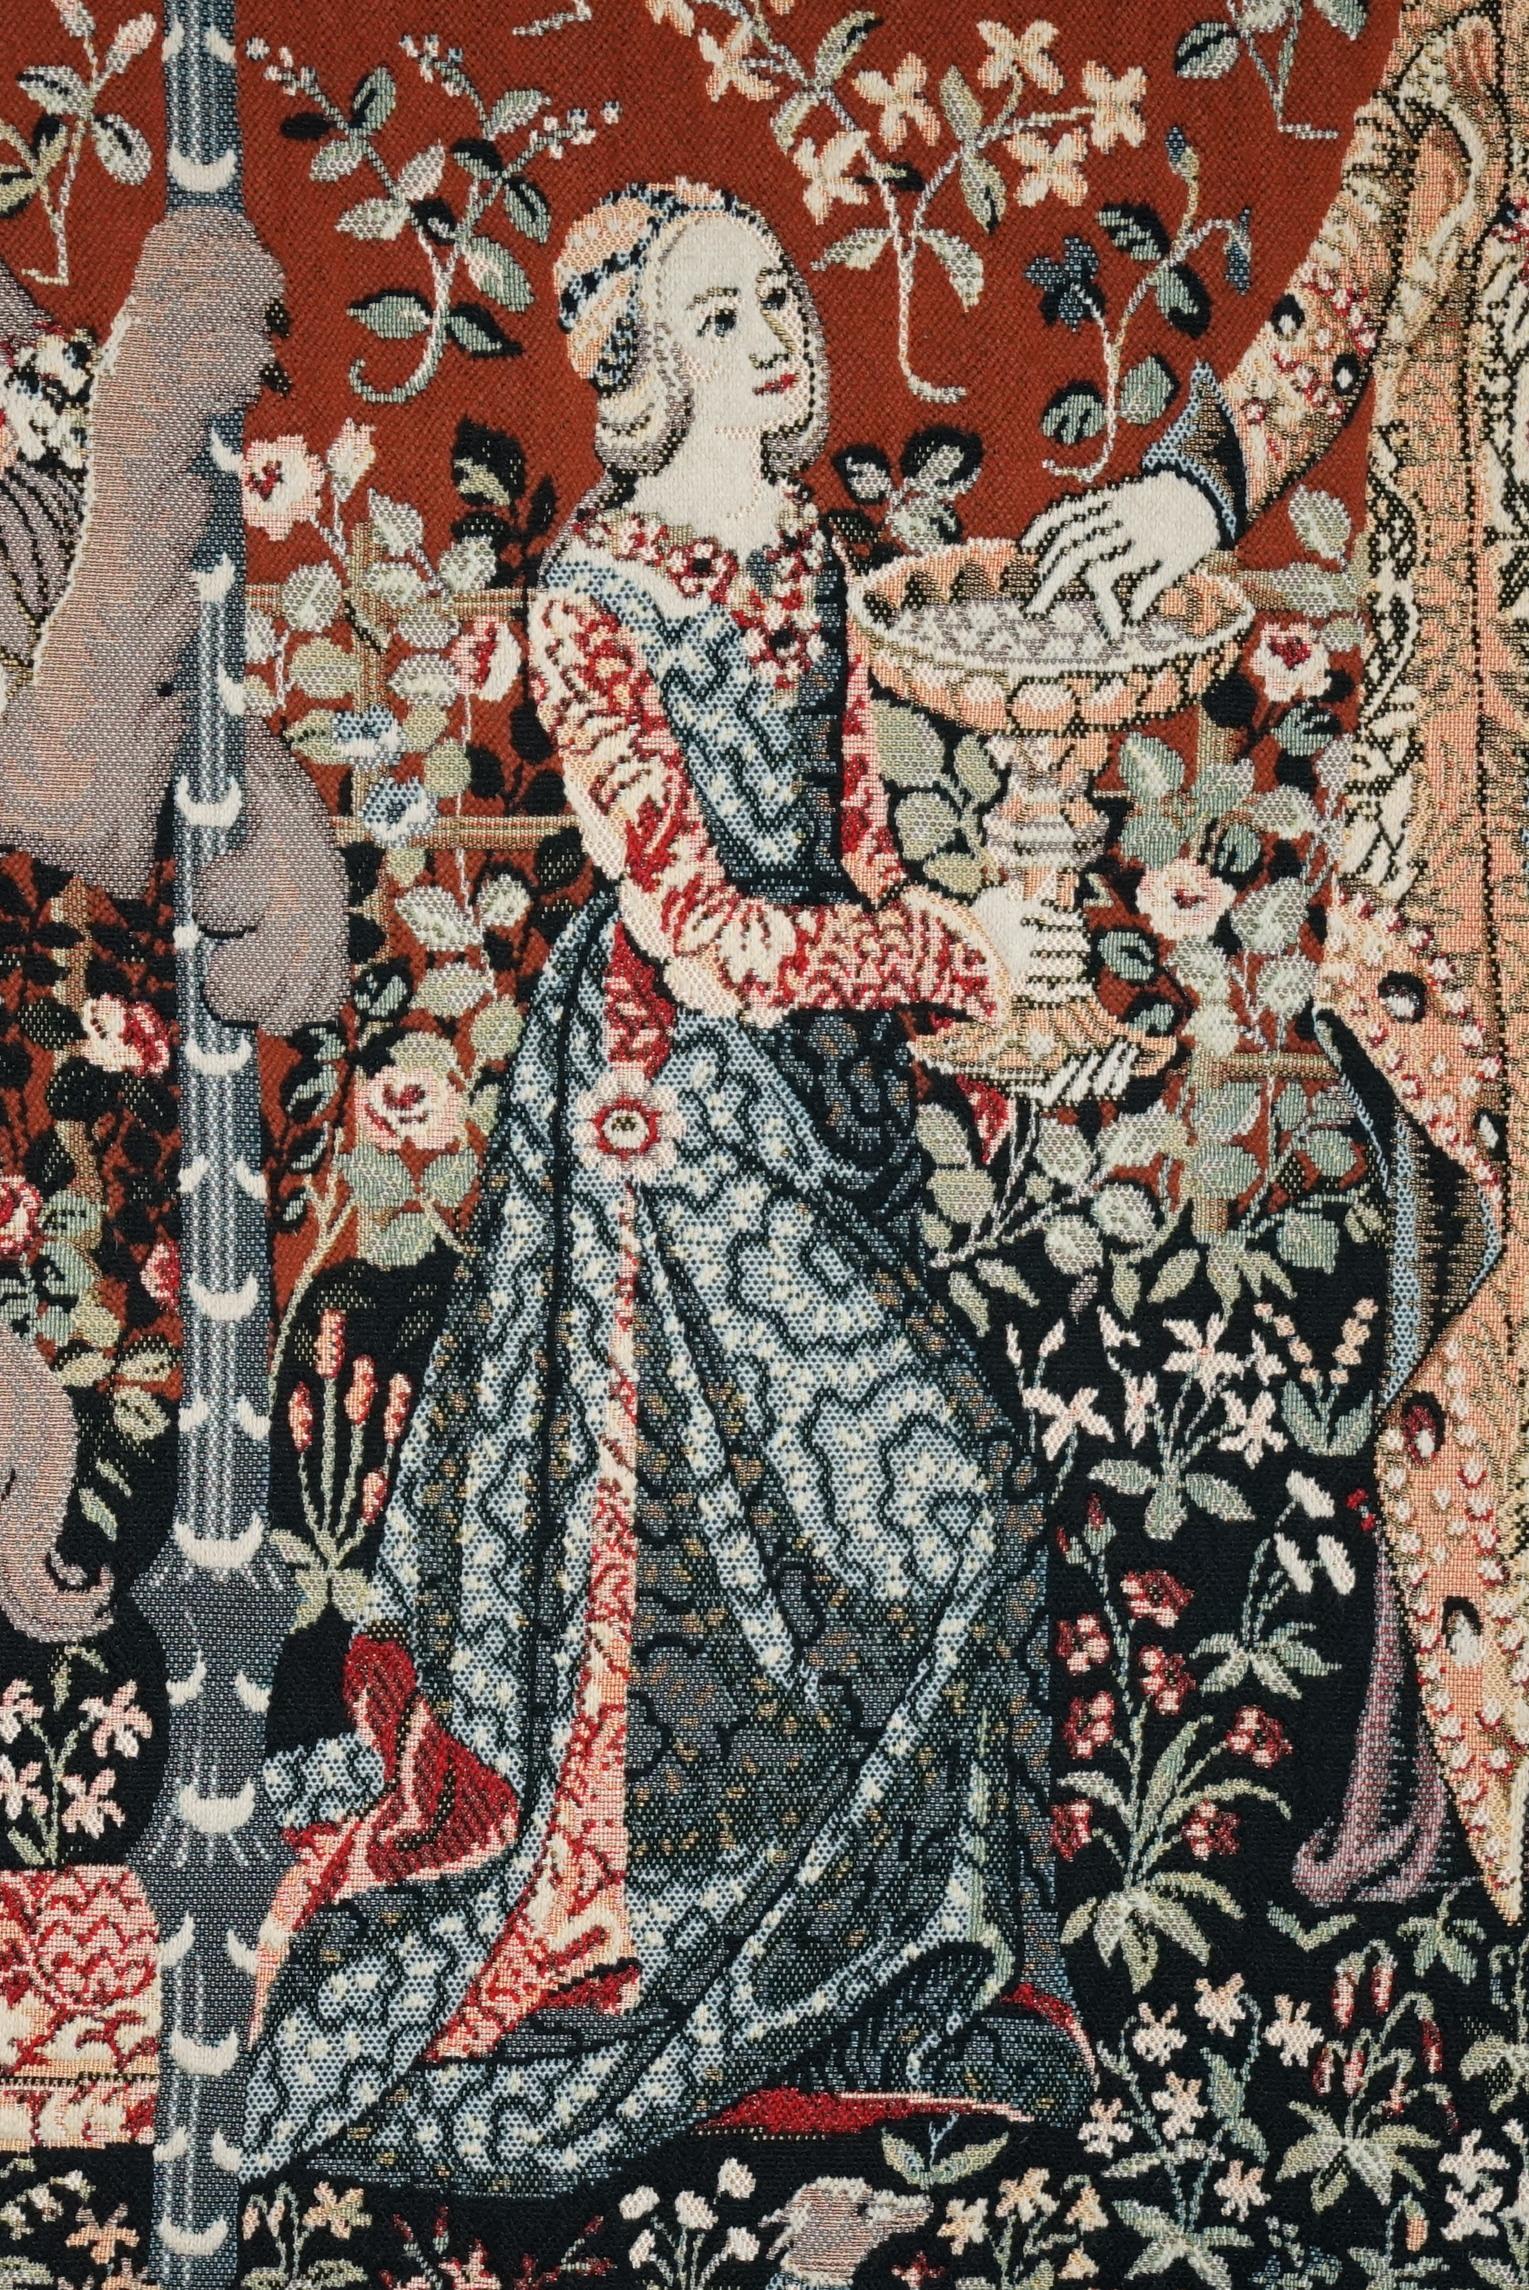 Embroidered ViNTAGE THE LADY AND THE UNICORN LARGE WALL HANGING WOVEN TAPESTRY 216CM X 189CM For Sale